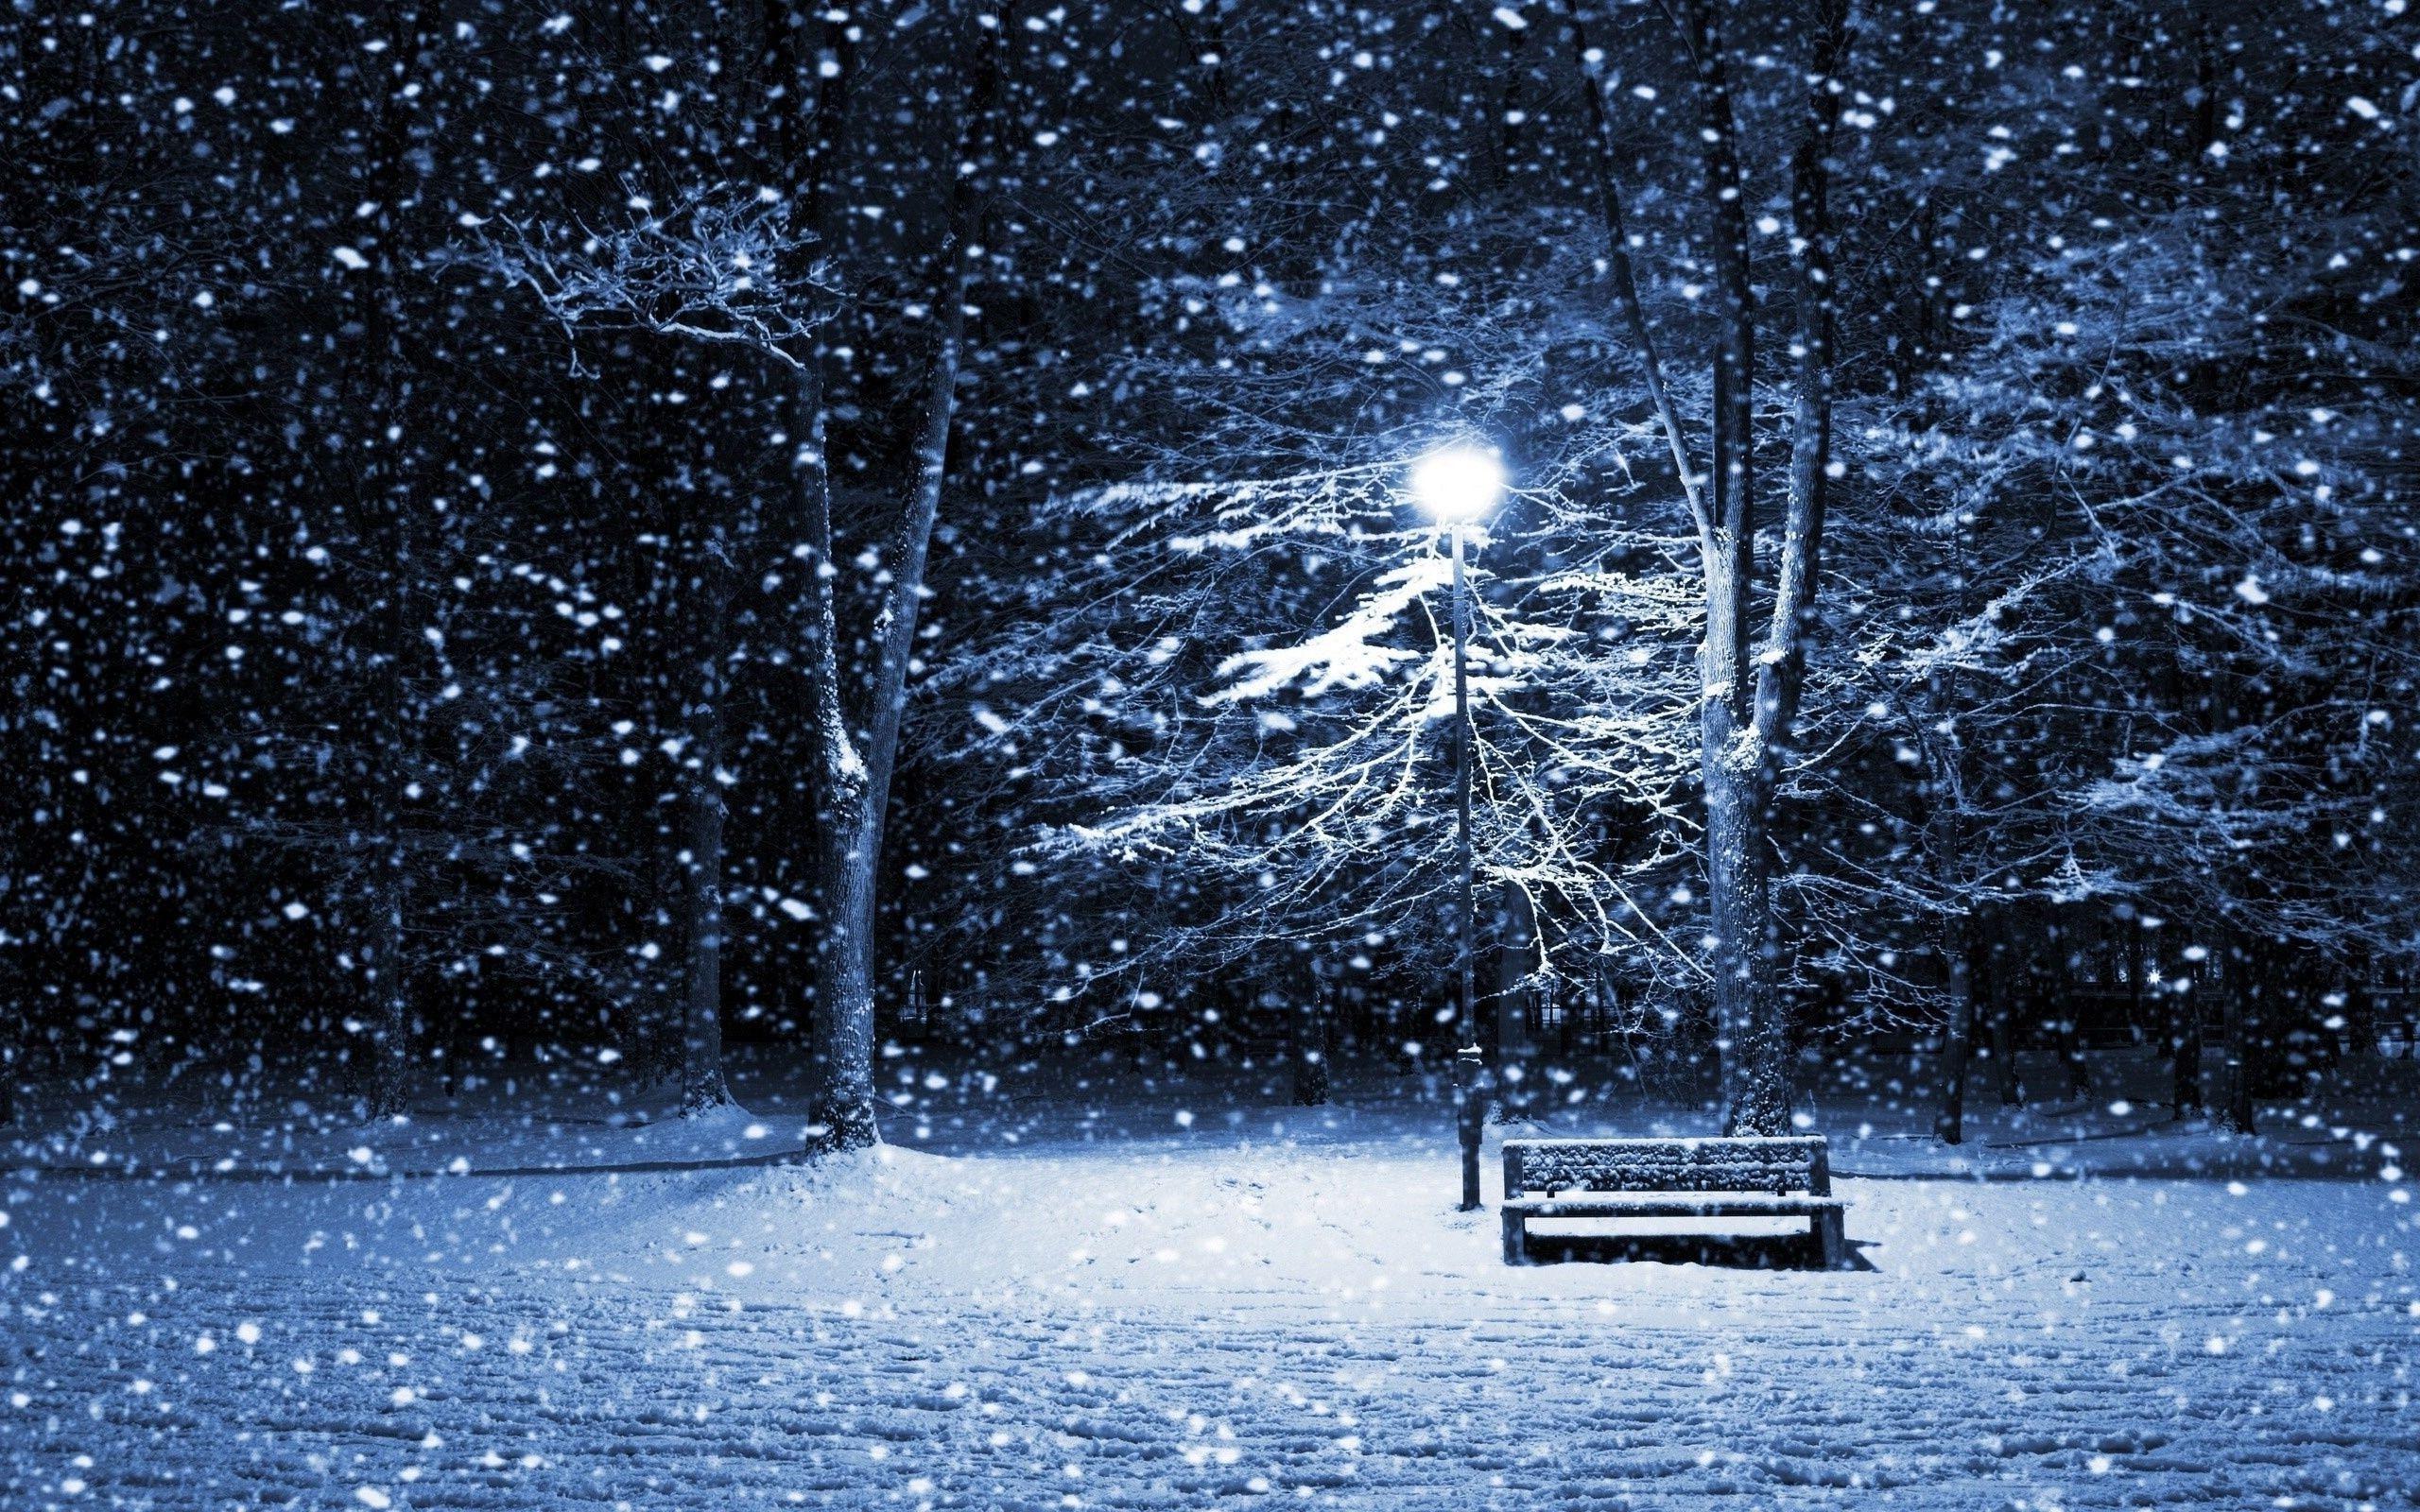 images of nighttime snow scenery